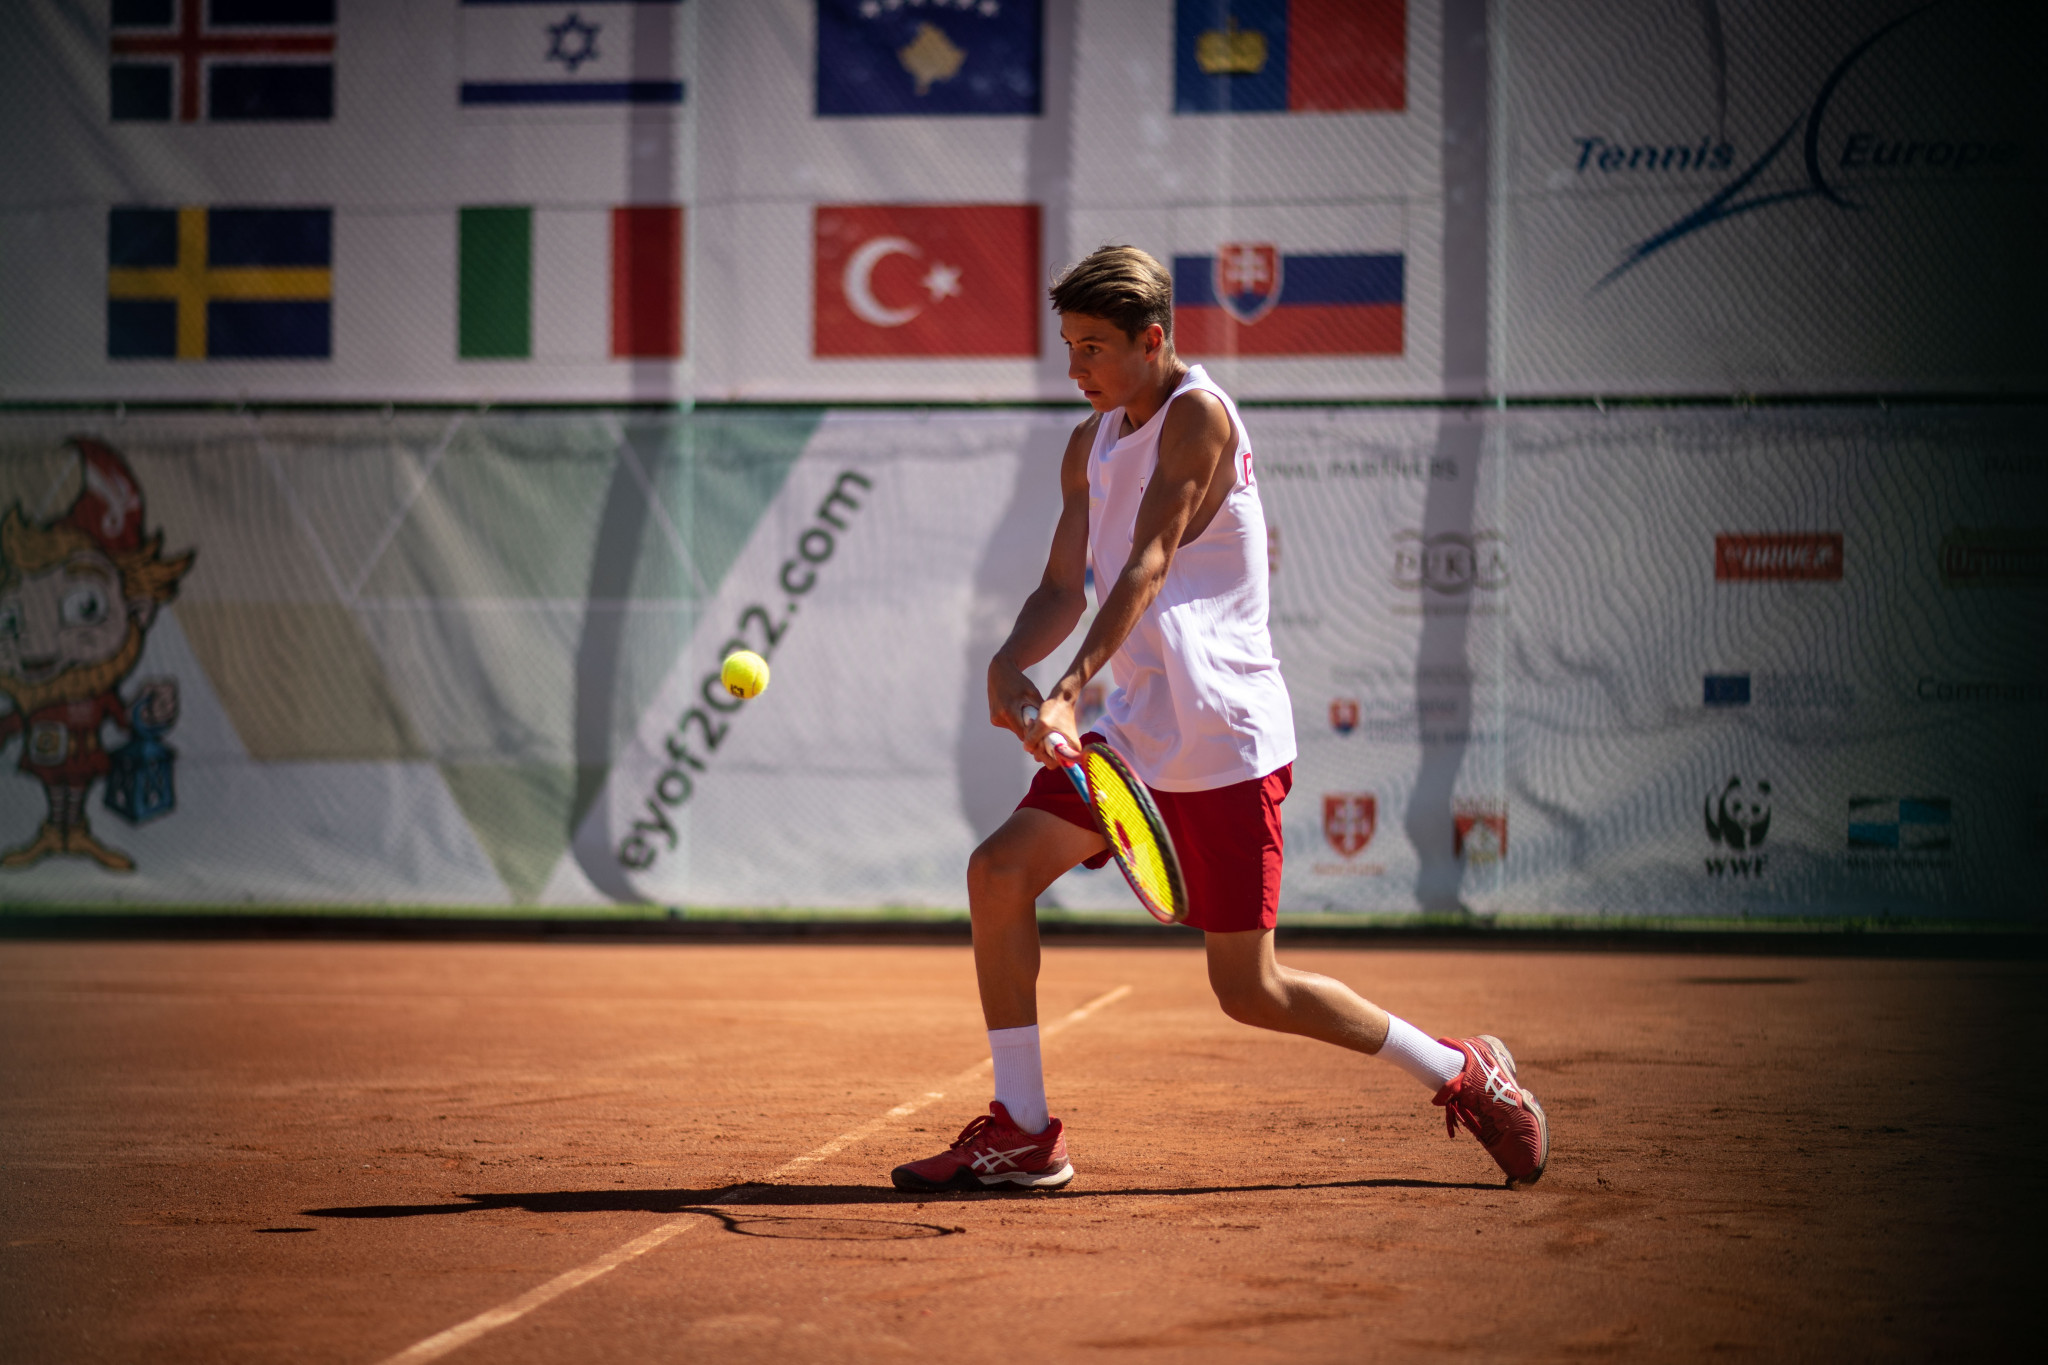 Top seed in the boys' tennis tournament, Alan Wazny of Poland, cruised through to the next round as he beat Iceland's Gudmundur Halldor Ingvarsson 6-0, 6-0 ©EOC